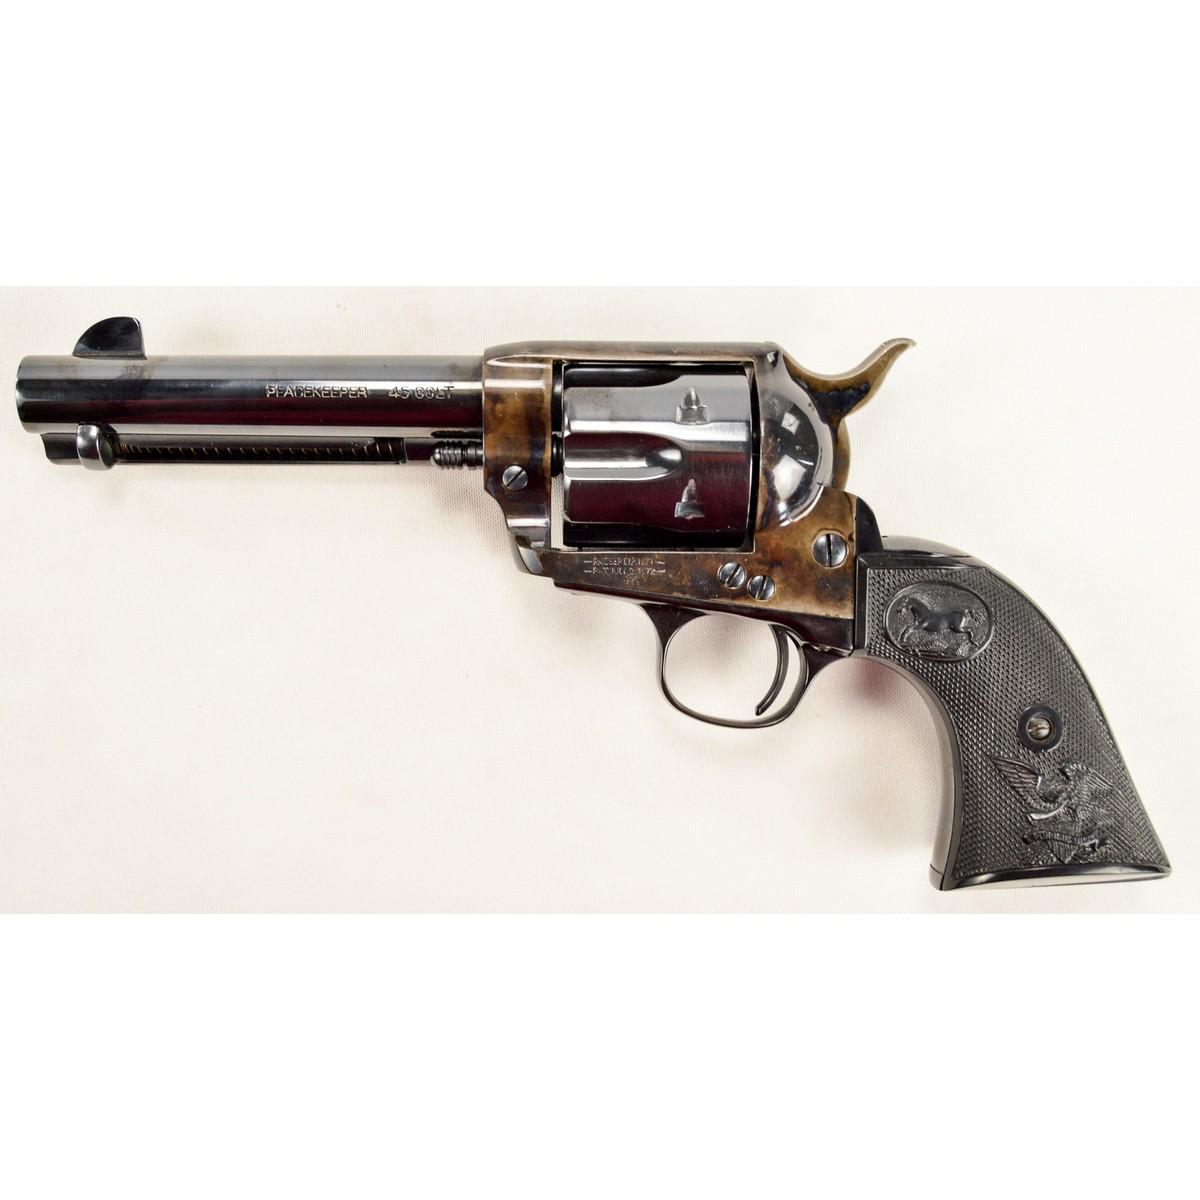 American Western Arms Peacekeeper 45 Colt Revolver